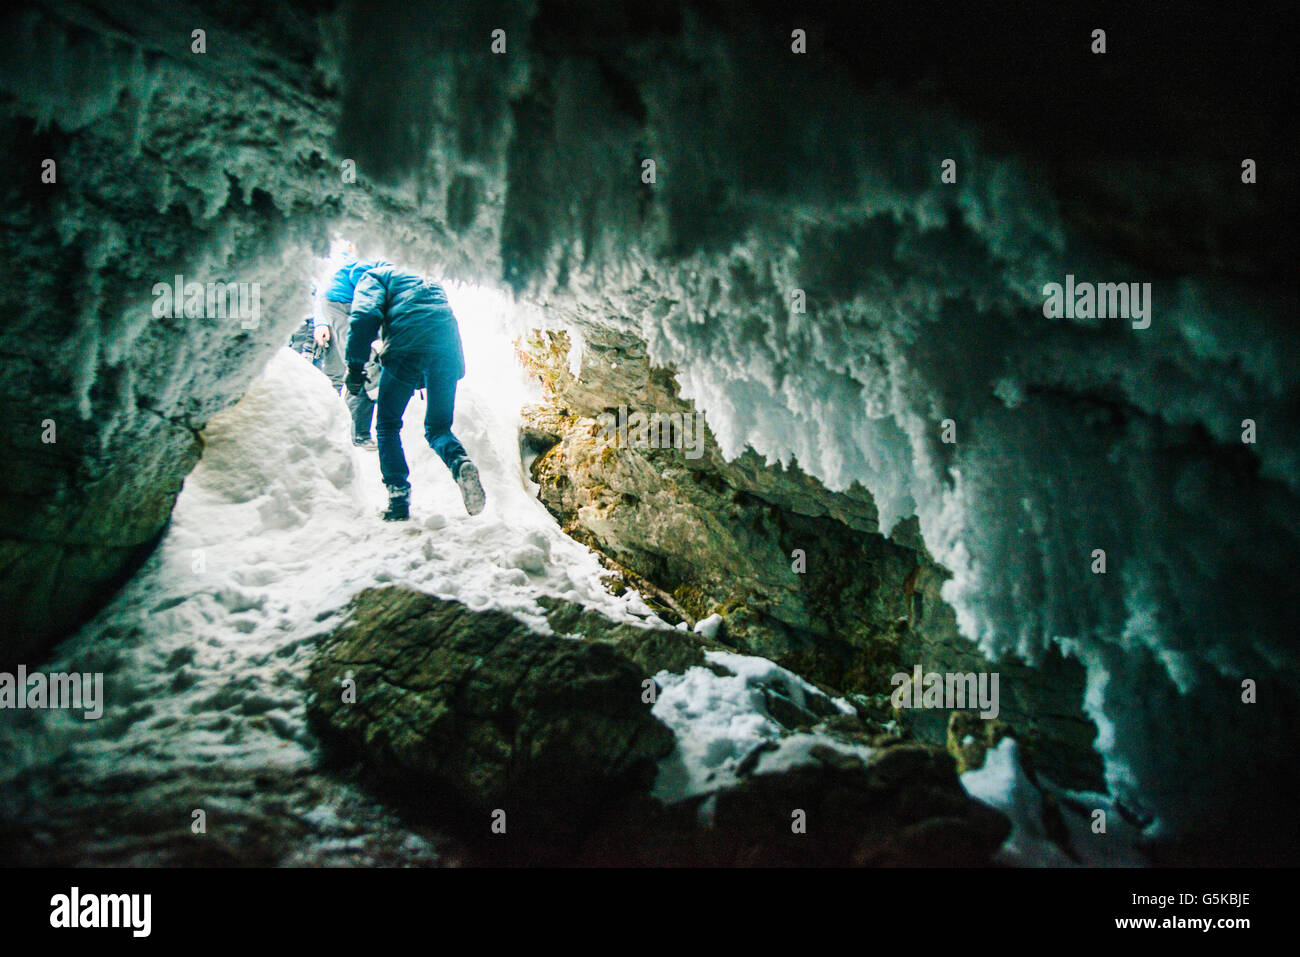 Caucasian hiker walking in icy cave Stock Photo